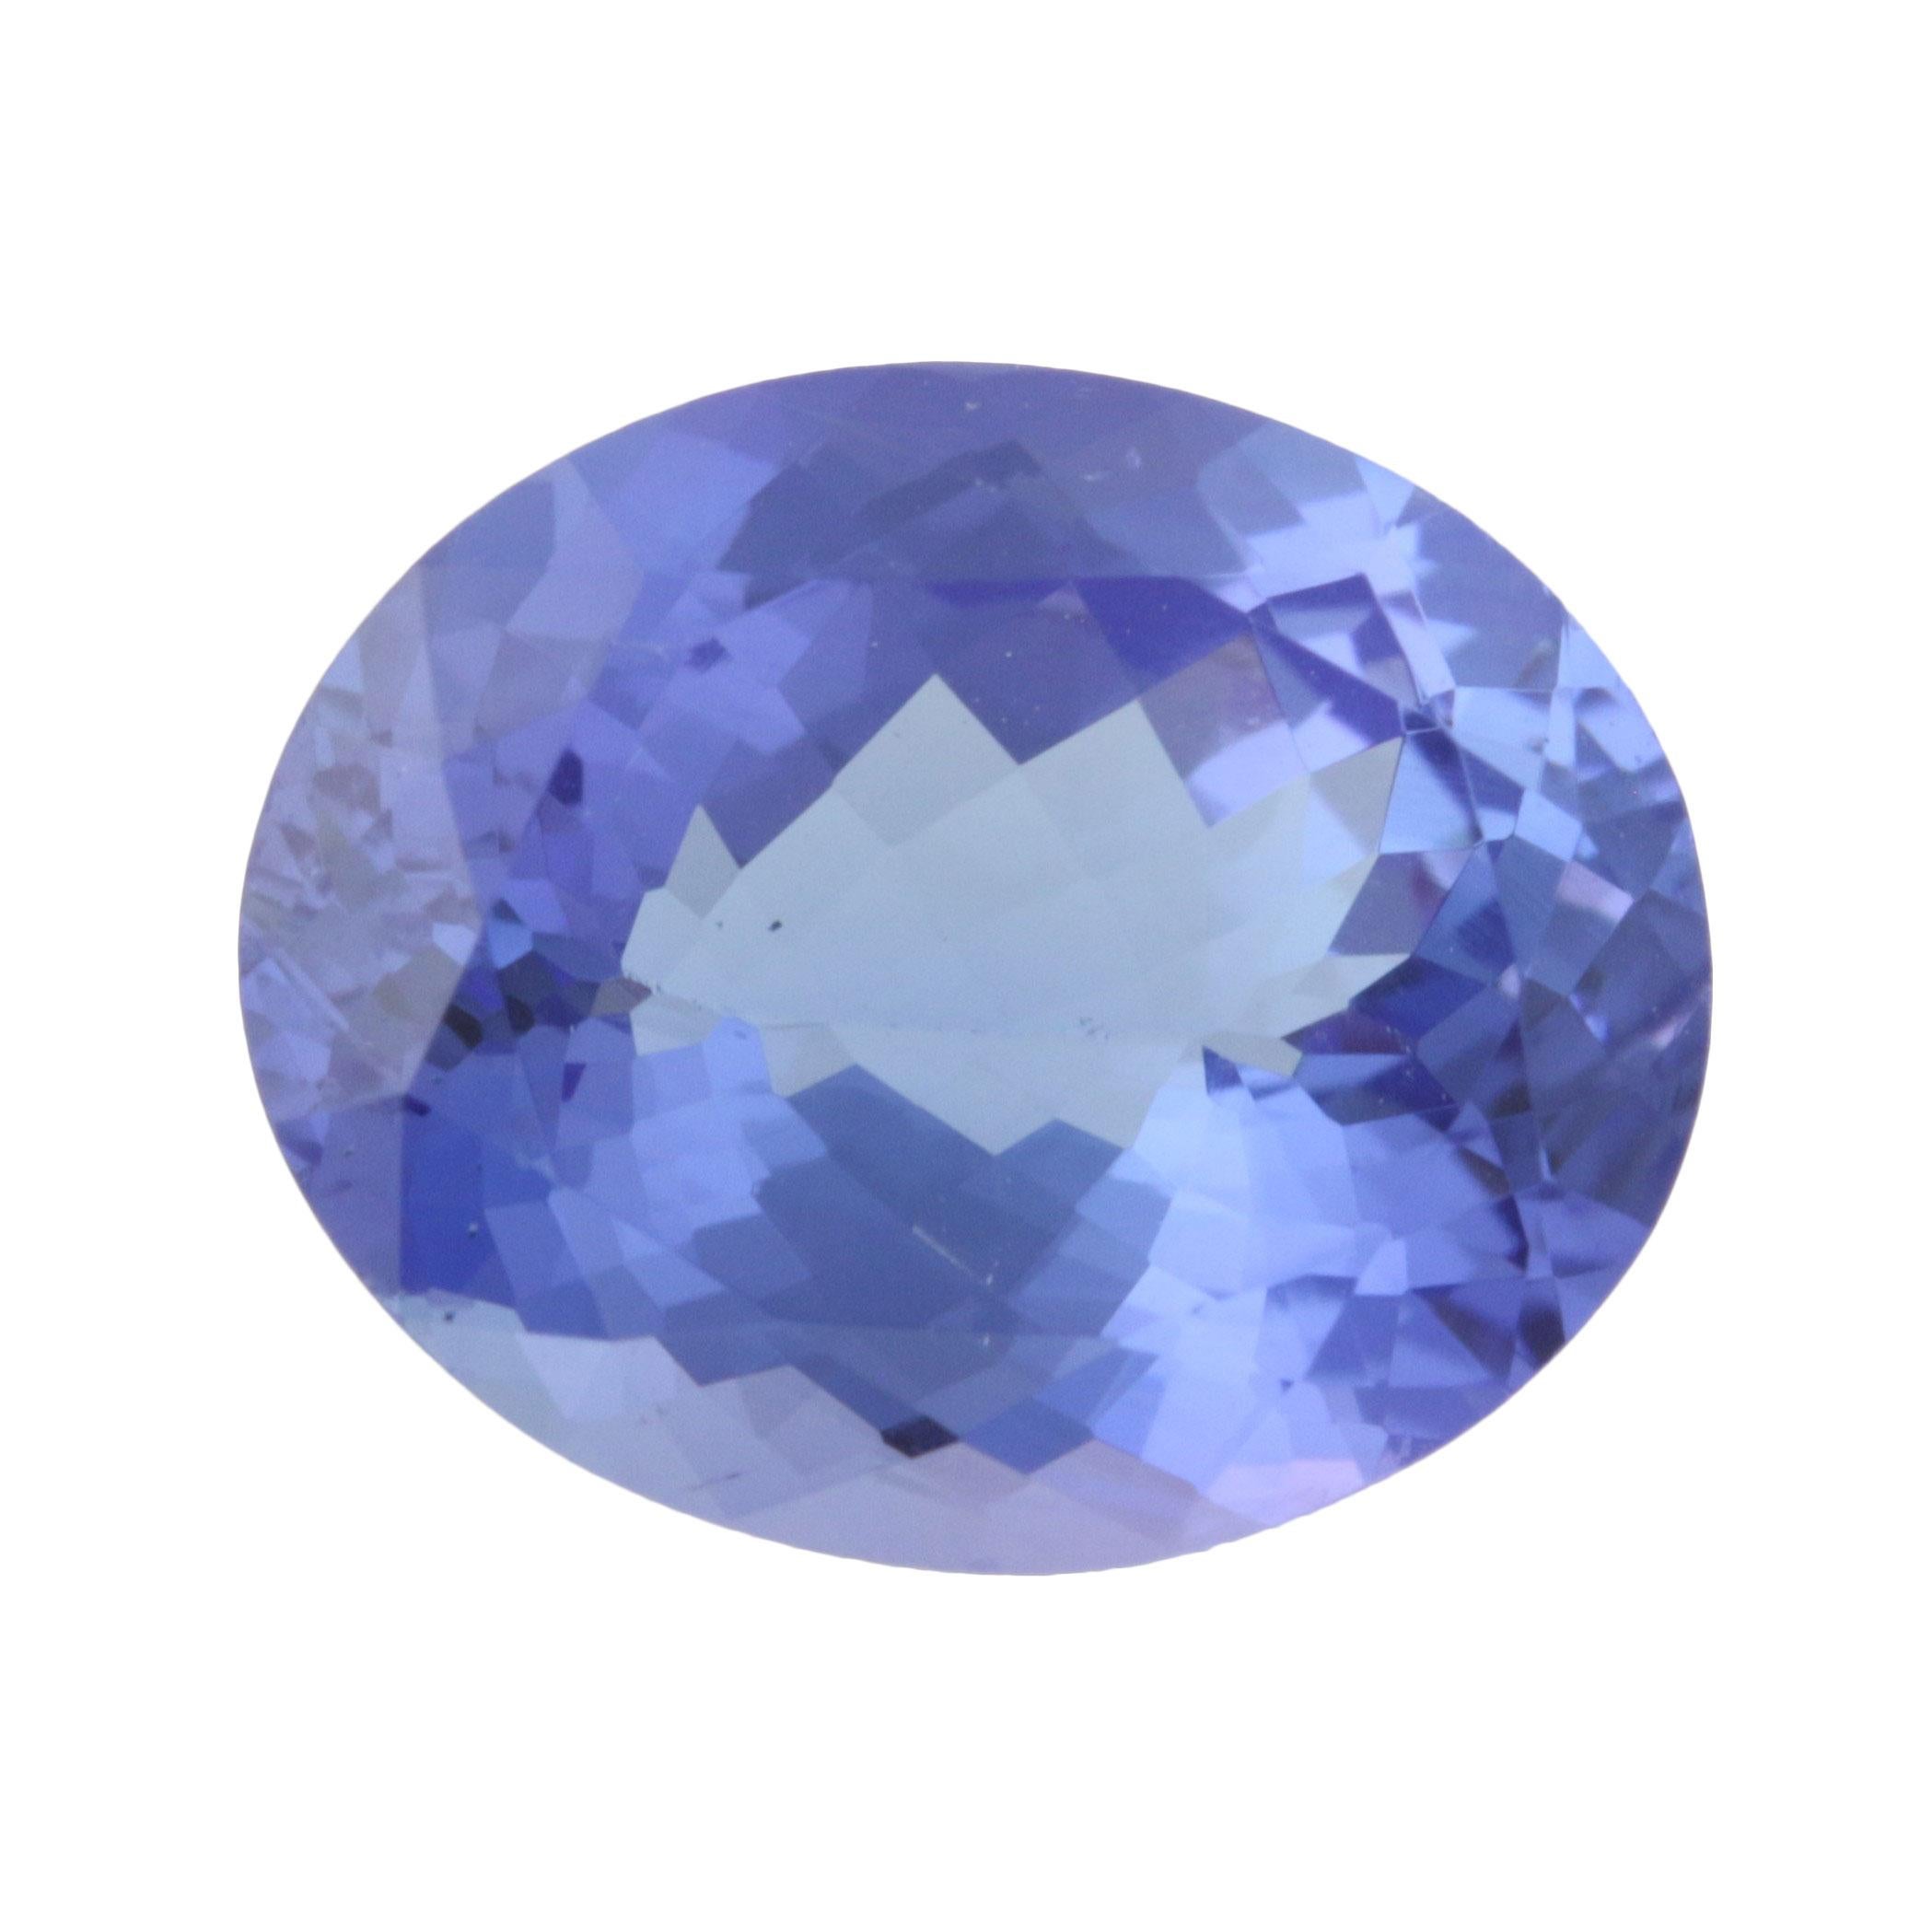 Shape/Cut: Oval 
Color: Purple 
Treatment: Routinely Enhanced
Dimensions (mm): 11.1 x 9.1
Weight: 3.66ct 
  
Please check out the enlarged pictures.

Thank you for taking the time to read our description. If you have any questions, please do not